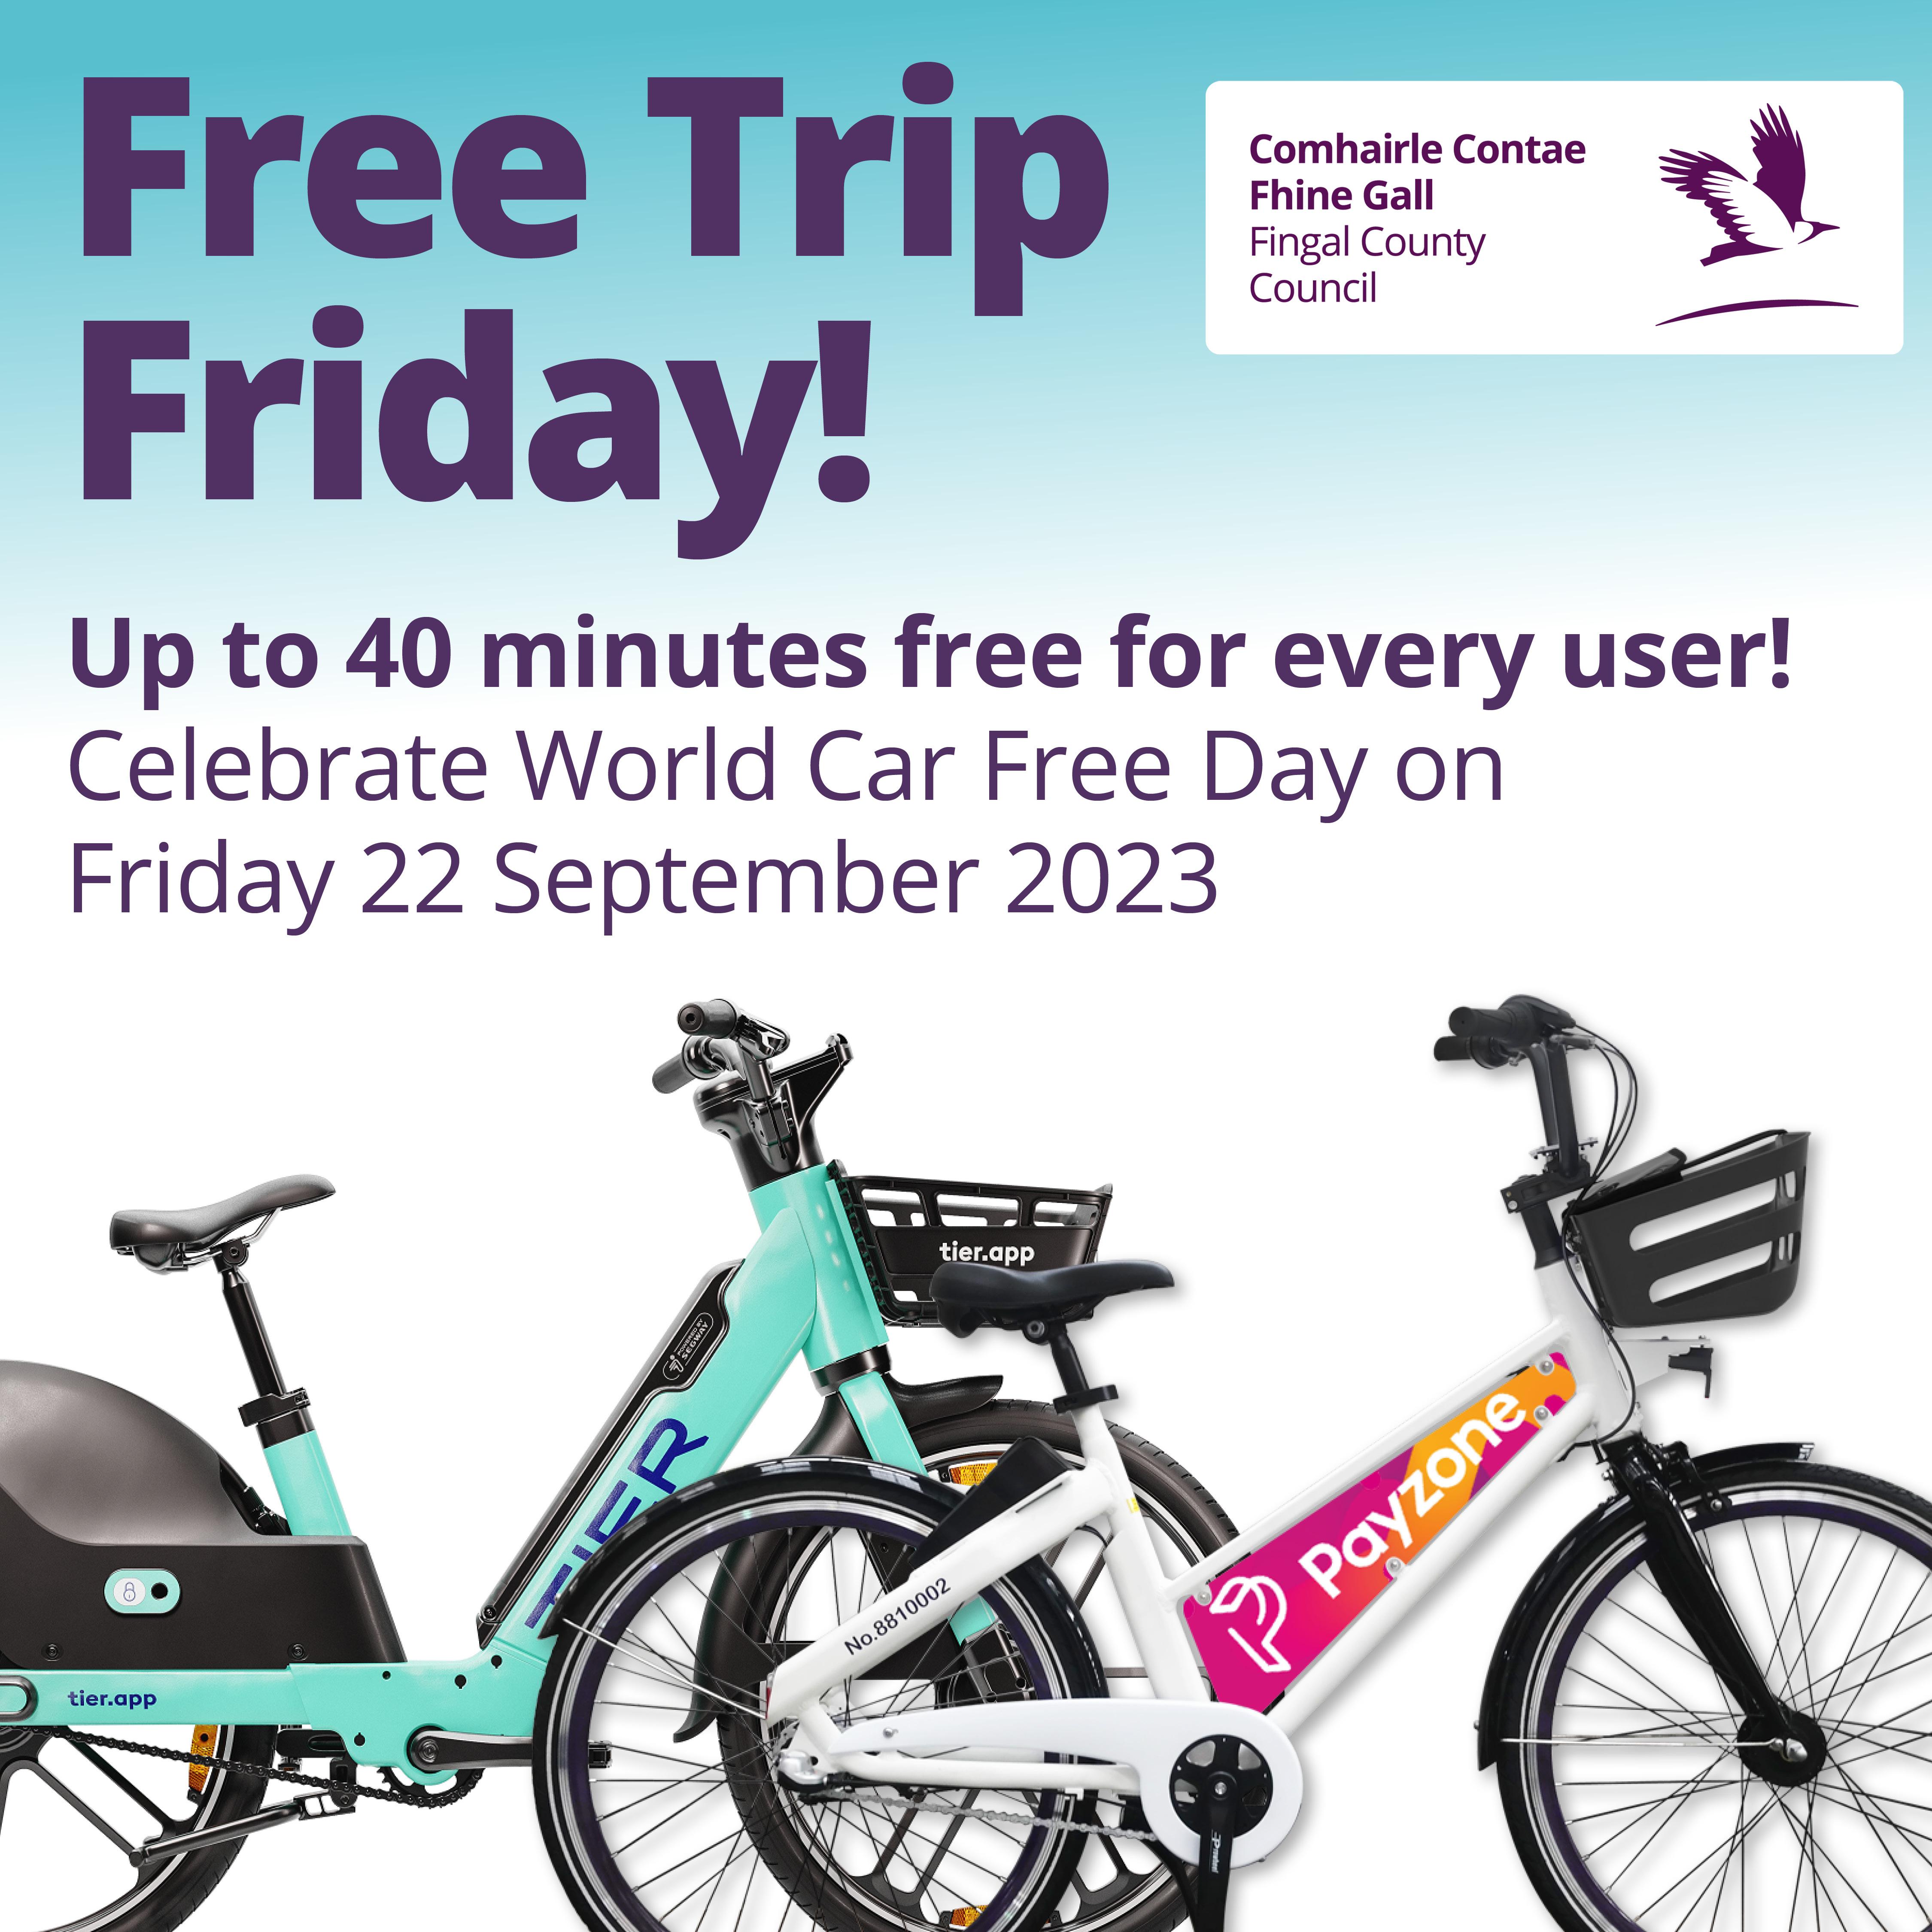 Free trip friday ebike and bike rental free in apps on friday 22 september